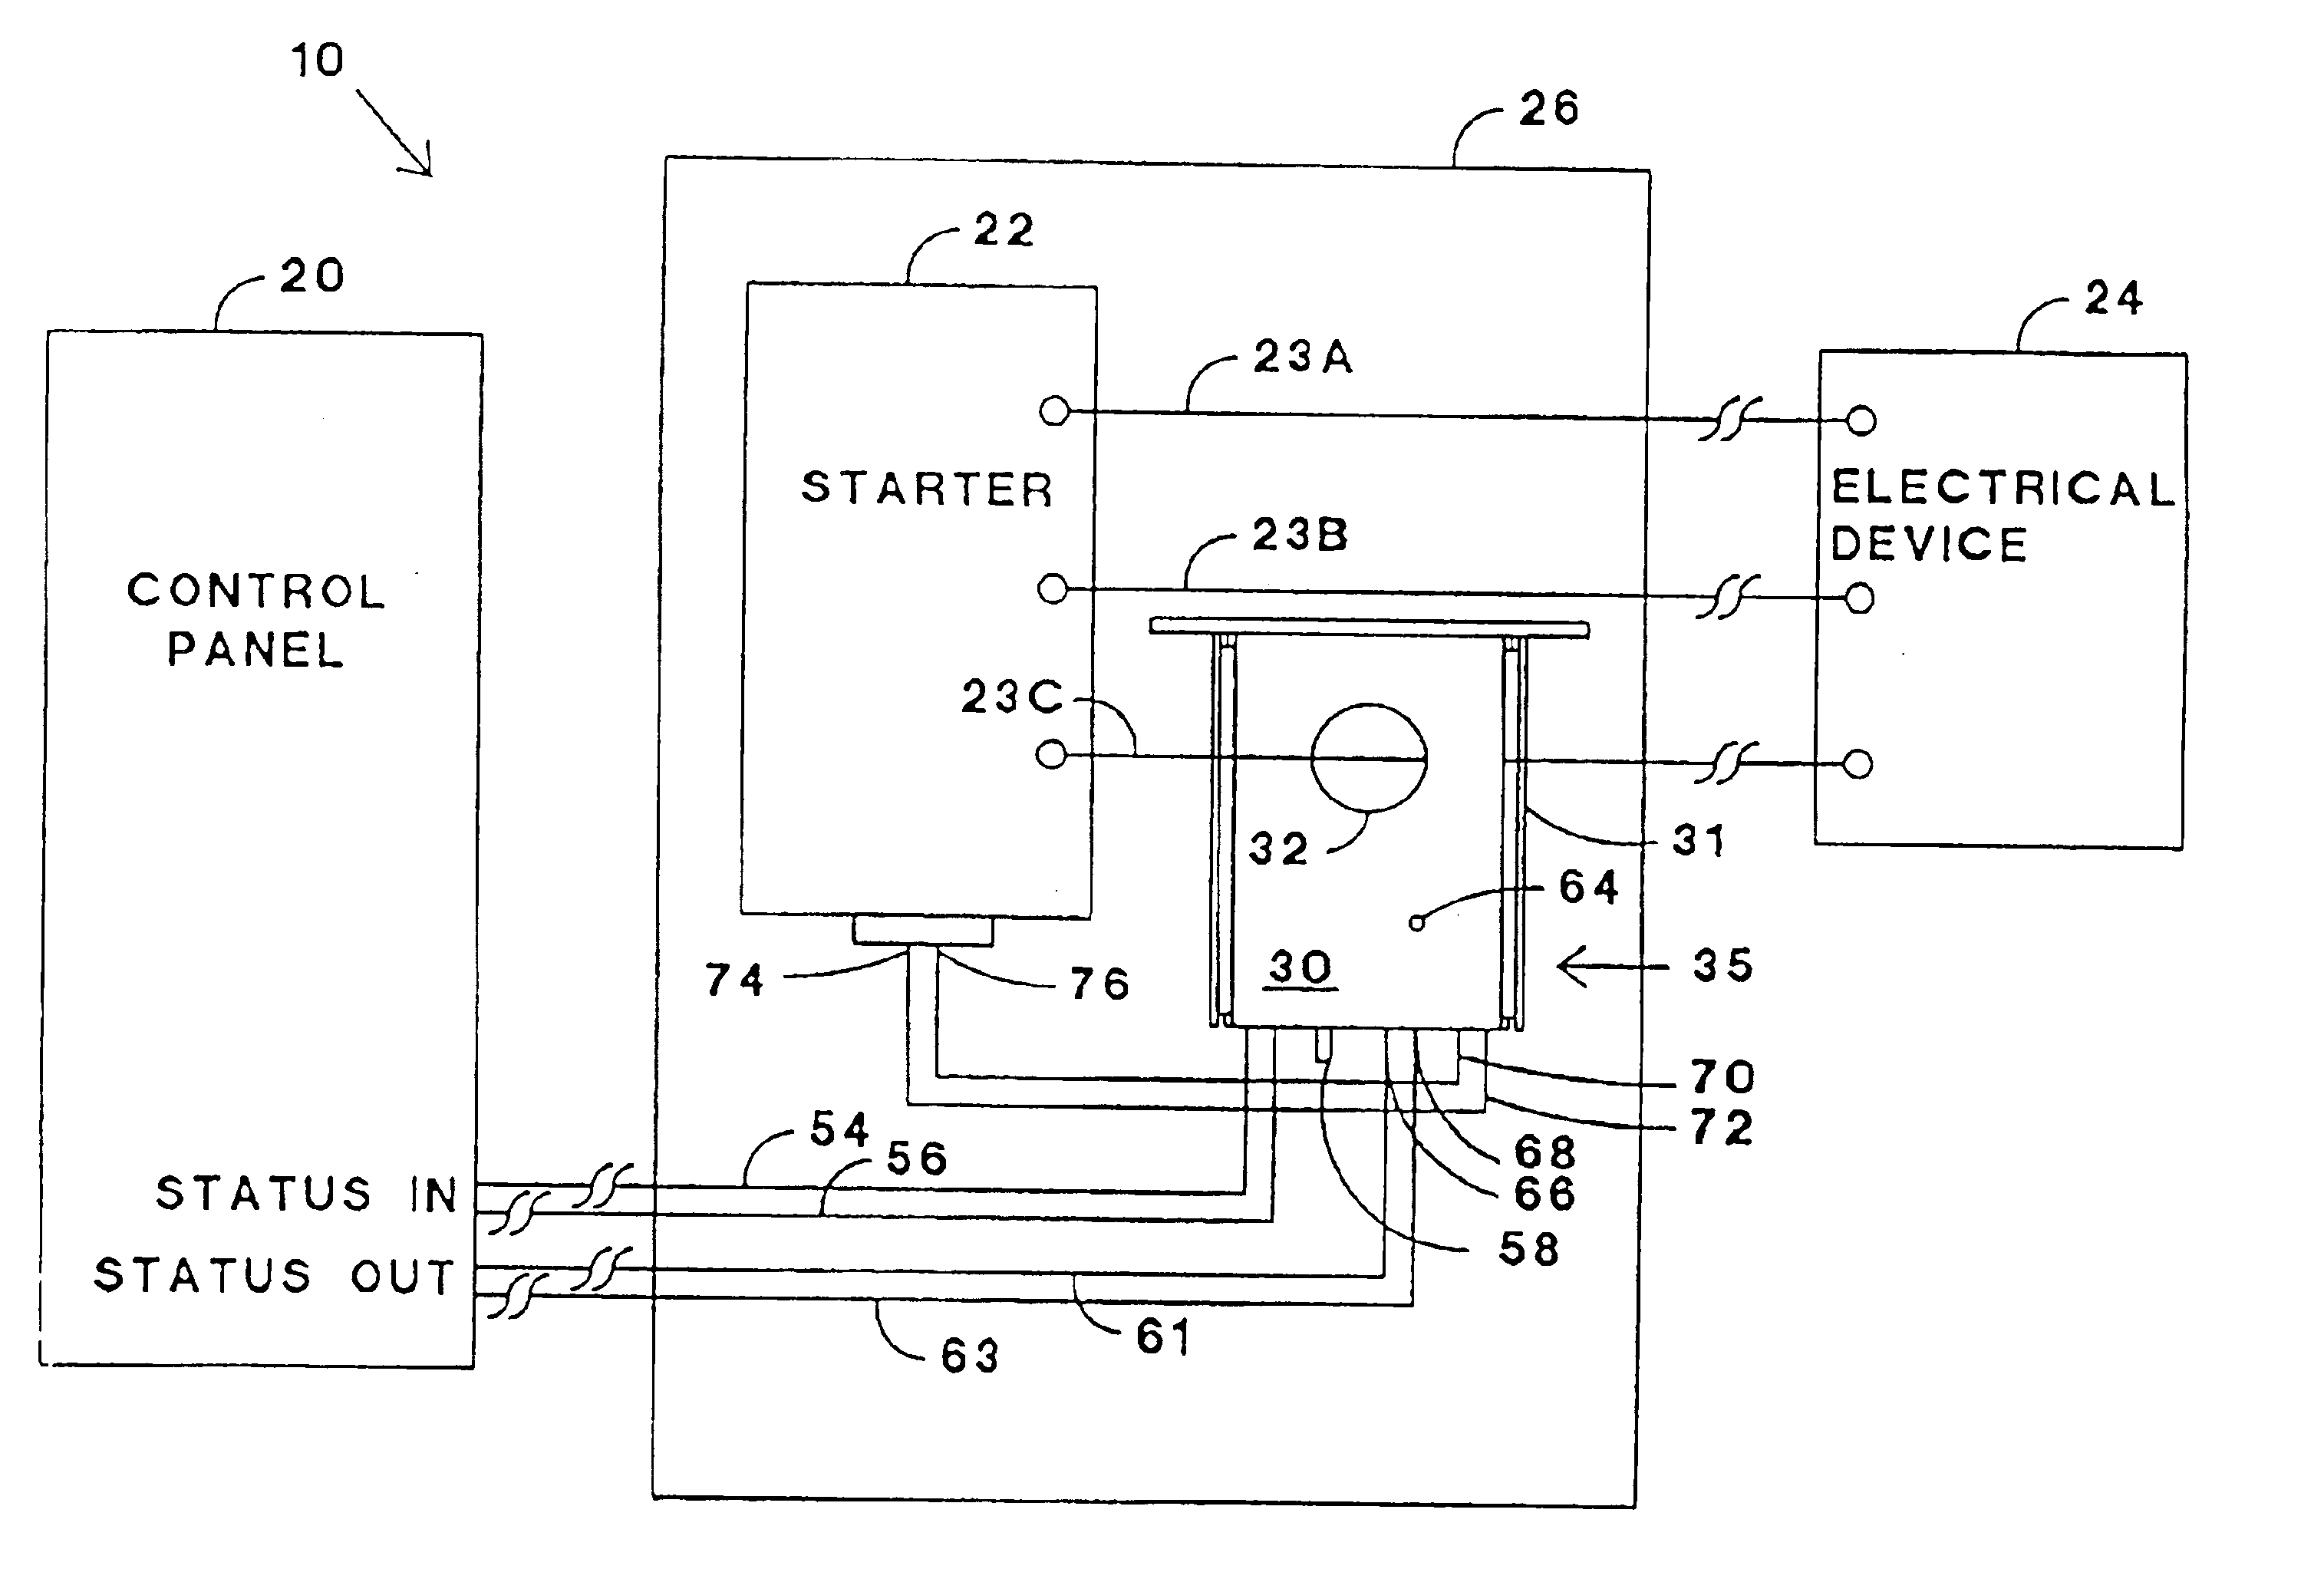 Combination current sensor and relay